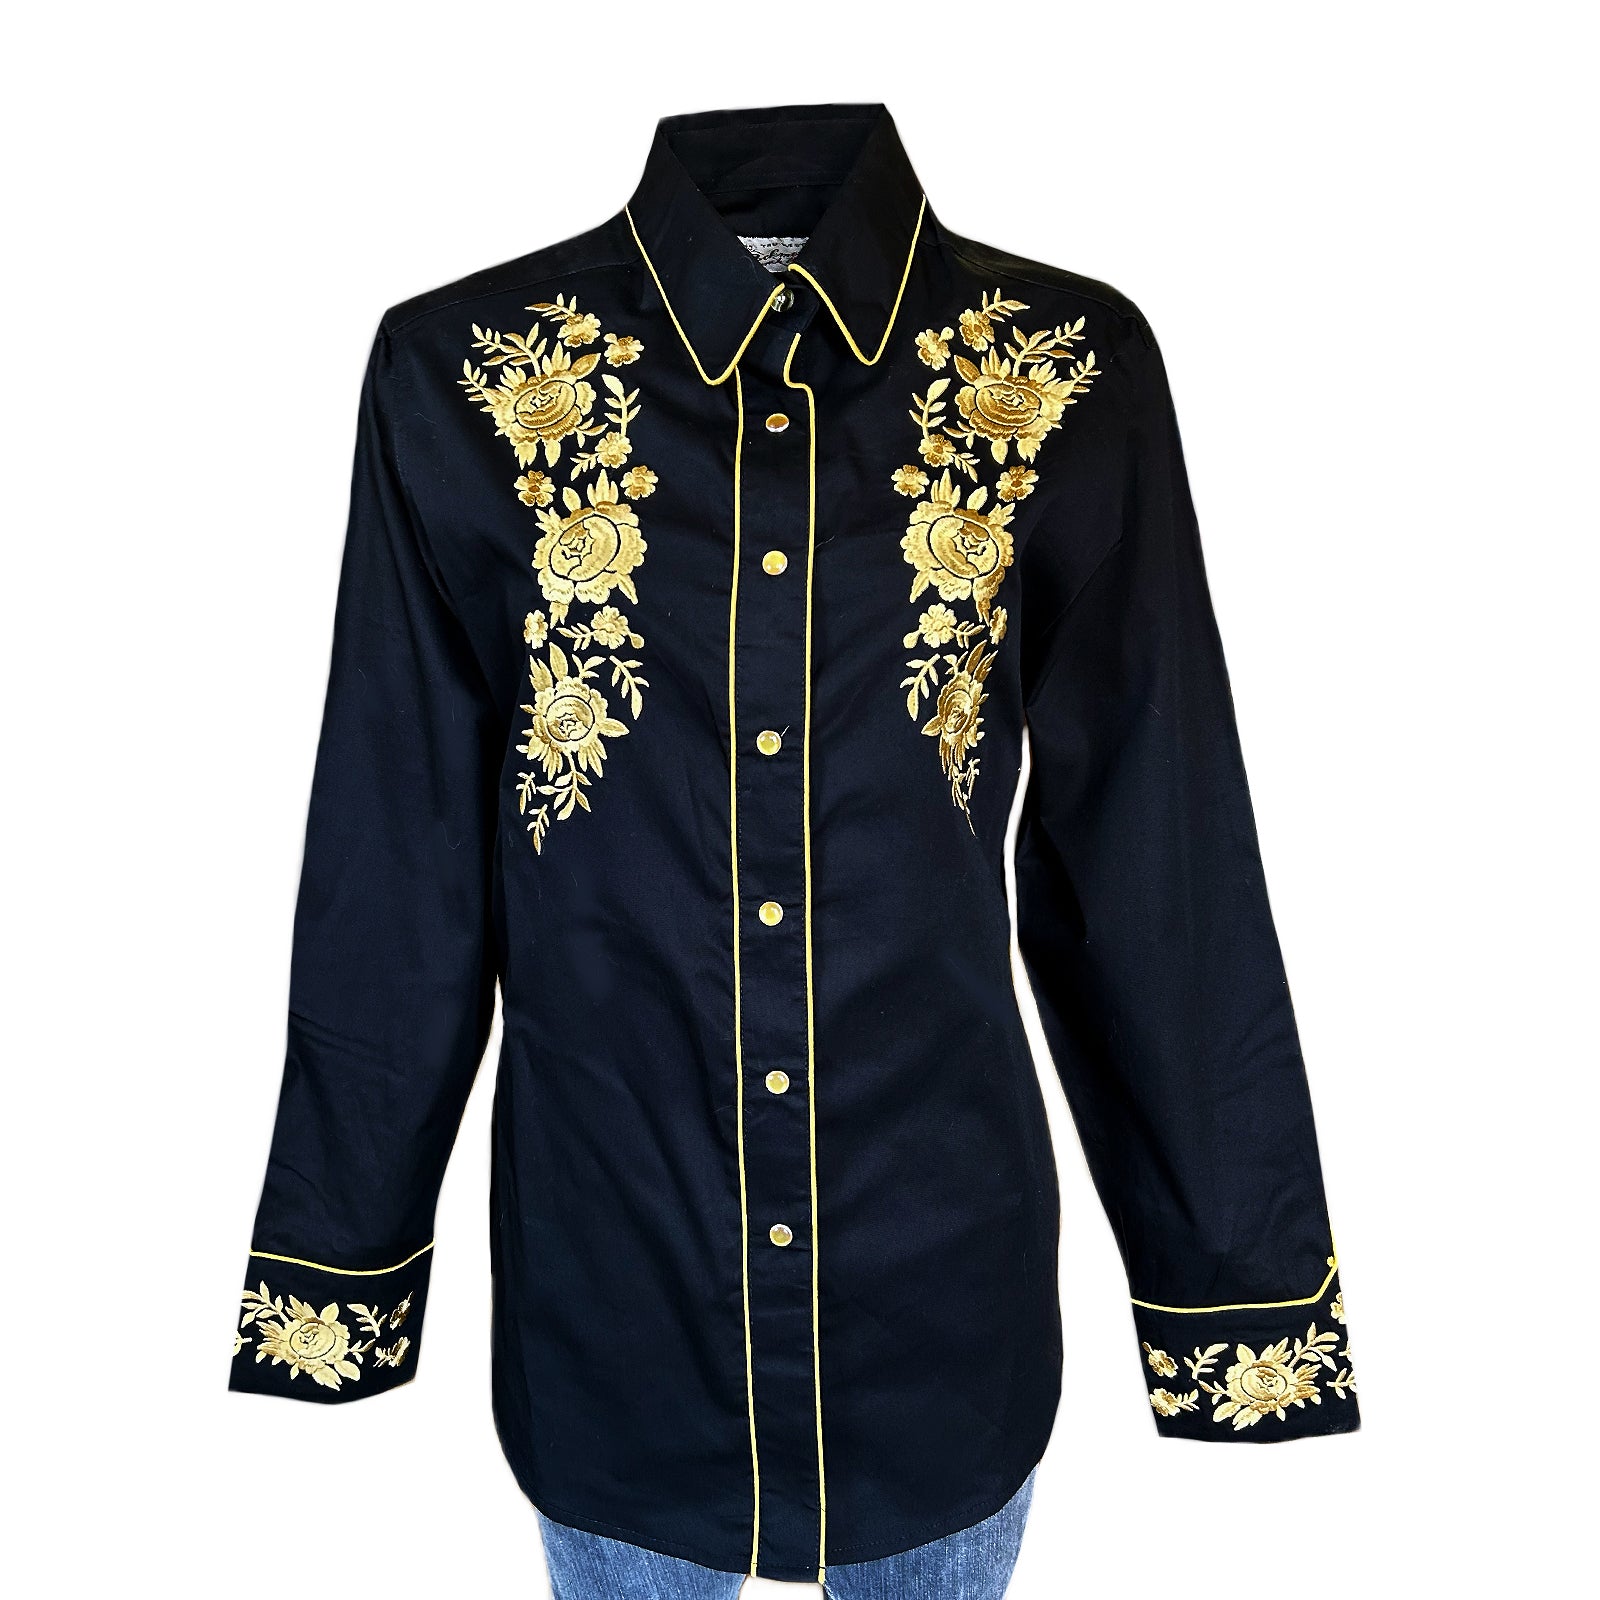 Rockmount Women's Vintage Cascading Floral Embroidery Western Shirt